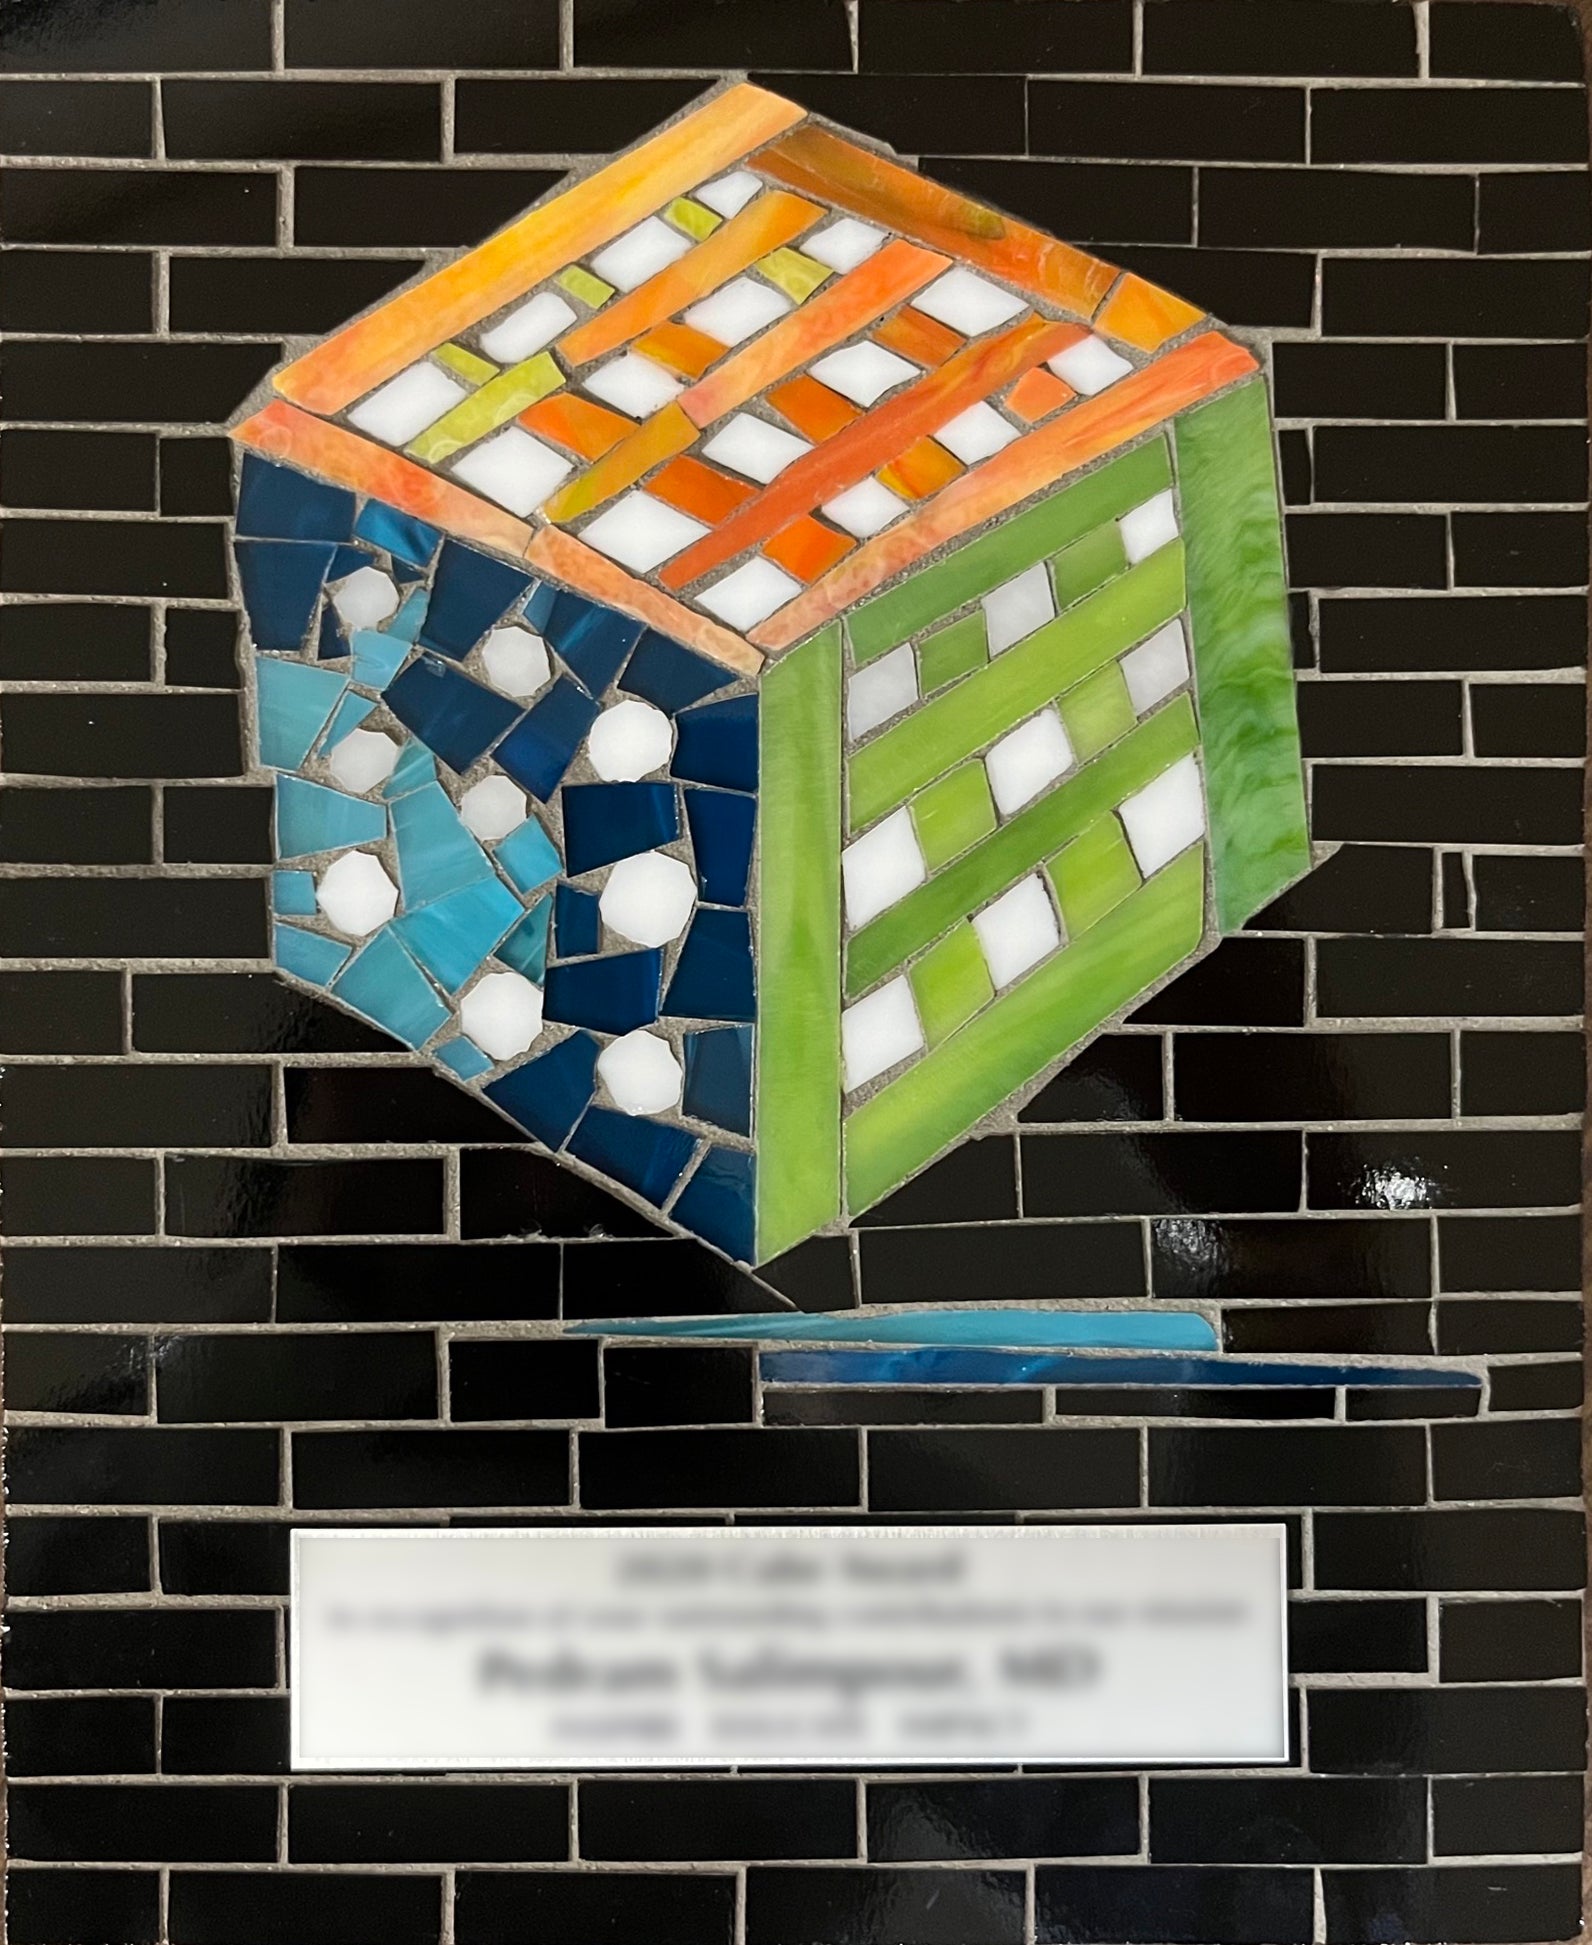 Discovery Cube Award with black background and mosaic cube of orange, blue, and green